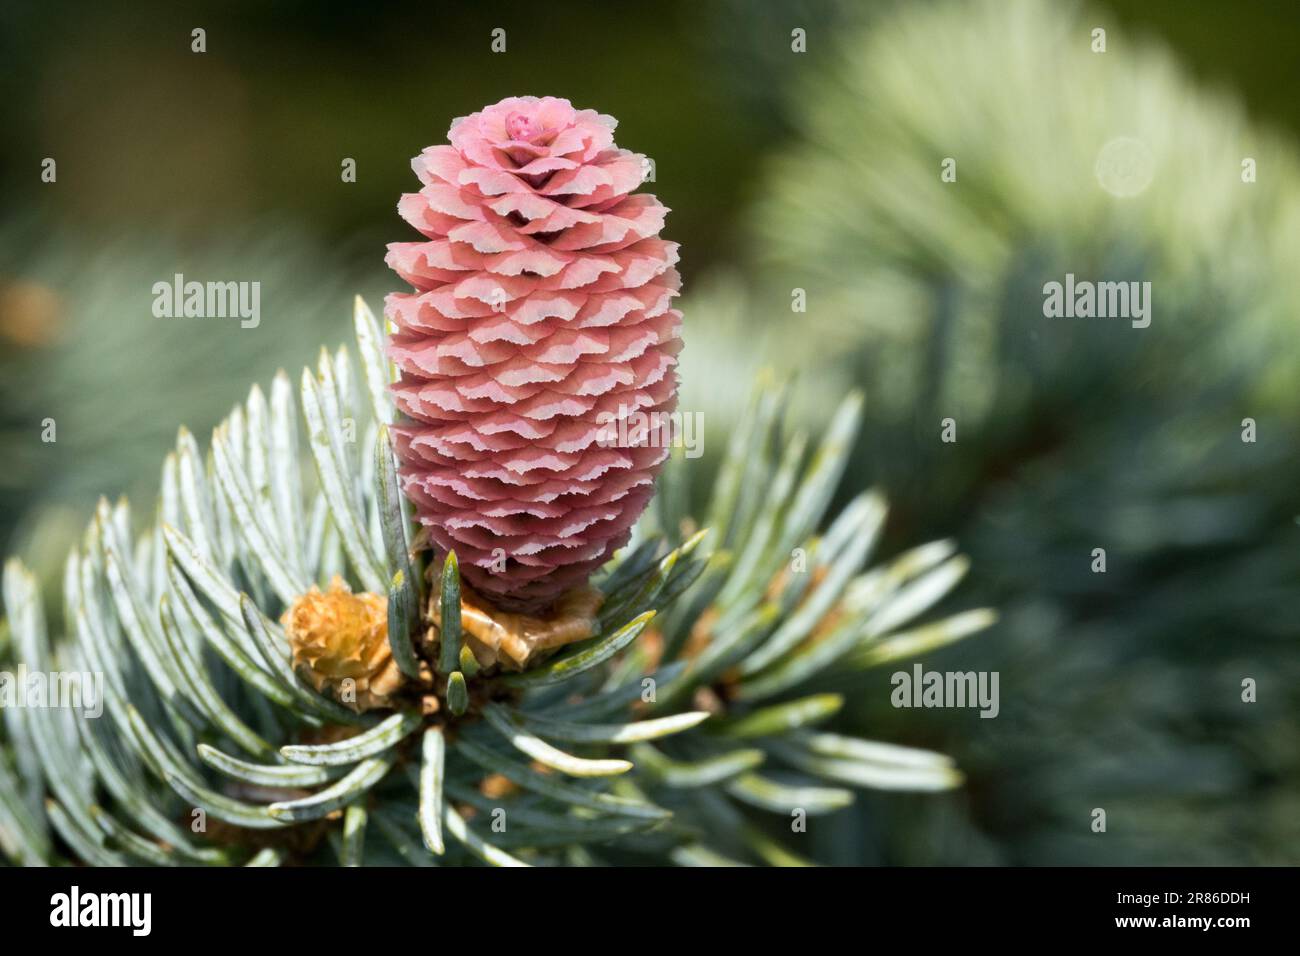 Colorado Blue Spruce Cone Picea pungens Hoopsii Picea Cone Close up Branch Needles Silver Spruce Twig Spring Spruce Closeup Shoot Gymnosperm Bud Stock Photo